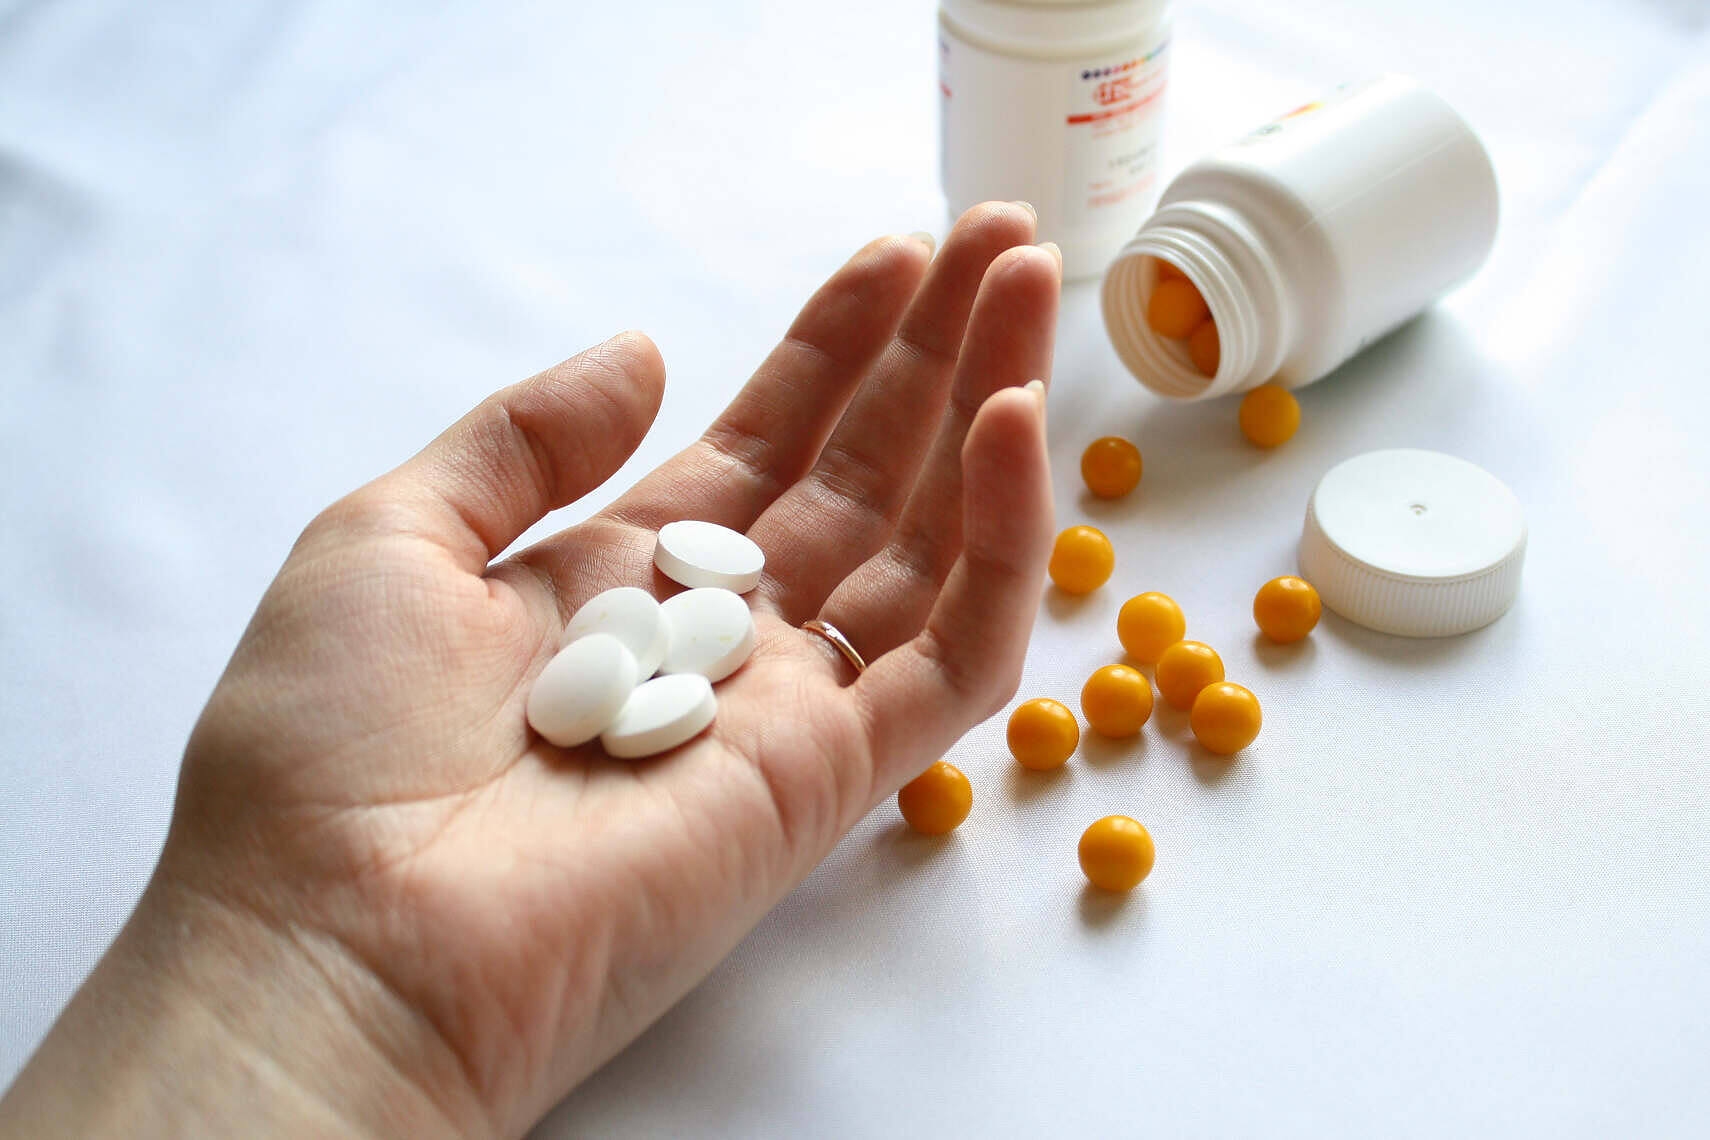 Hand holding white anti-craving pills with orange pills and medication bottles in background for addiction treatment